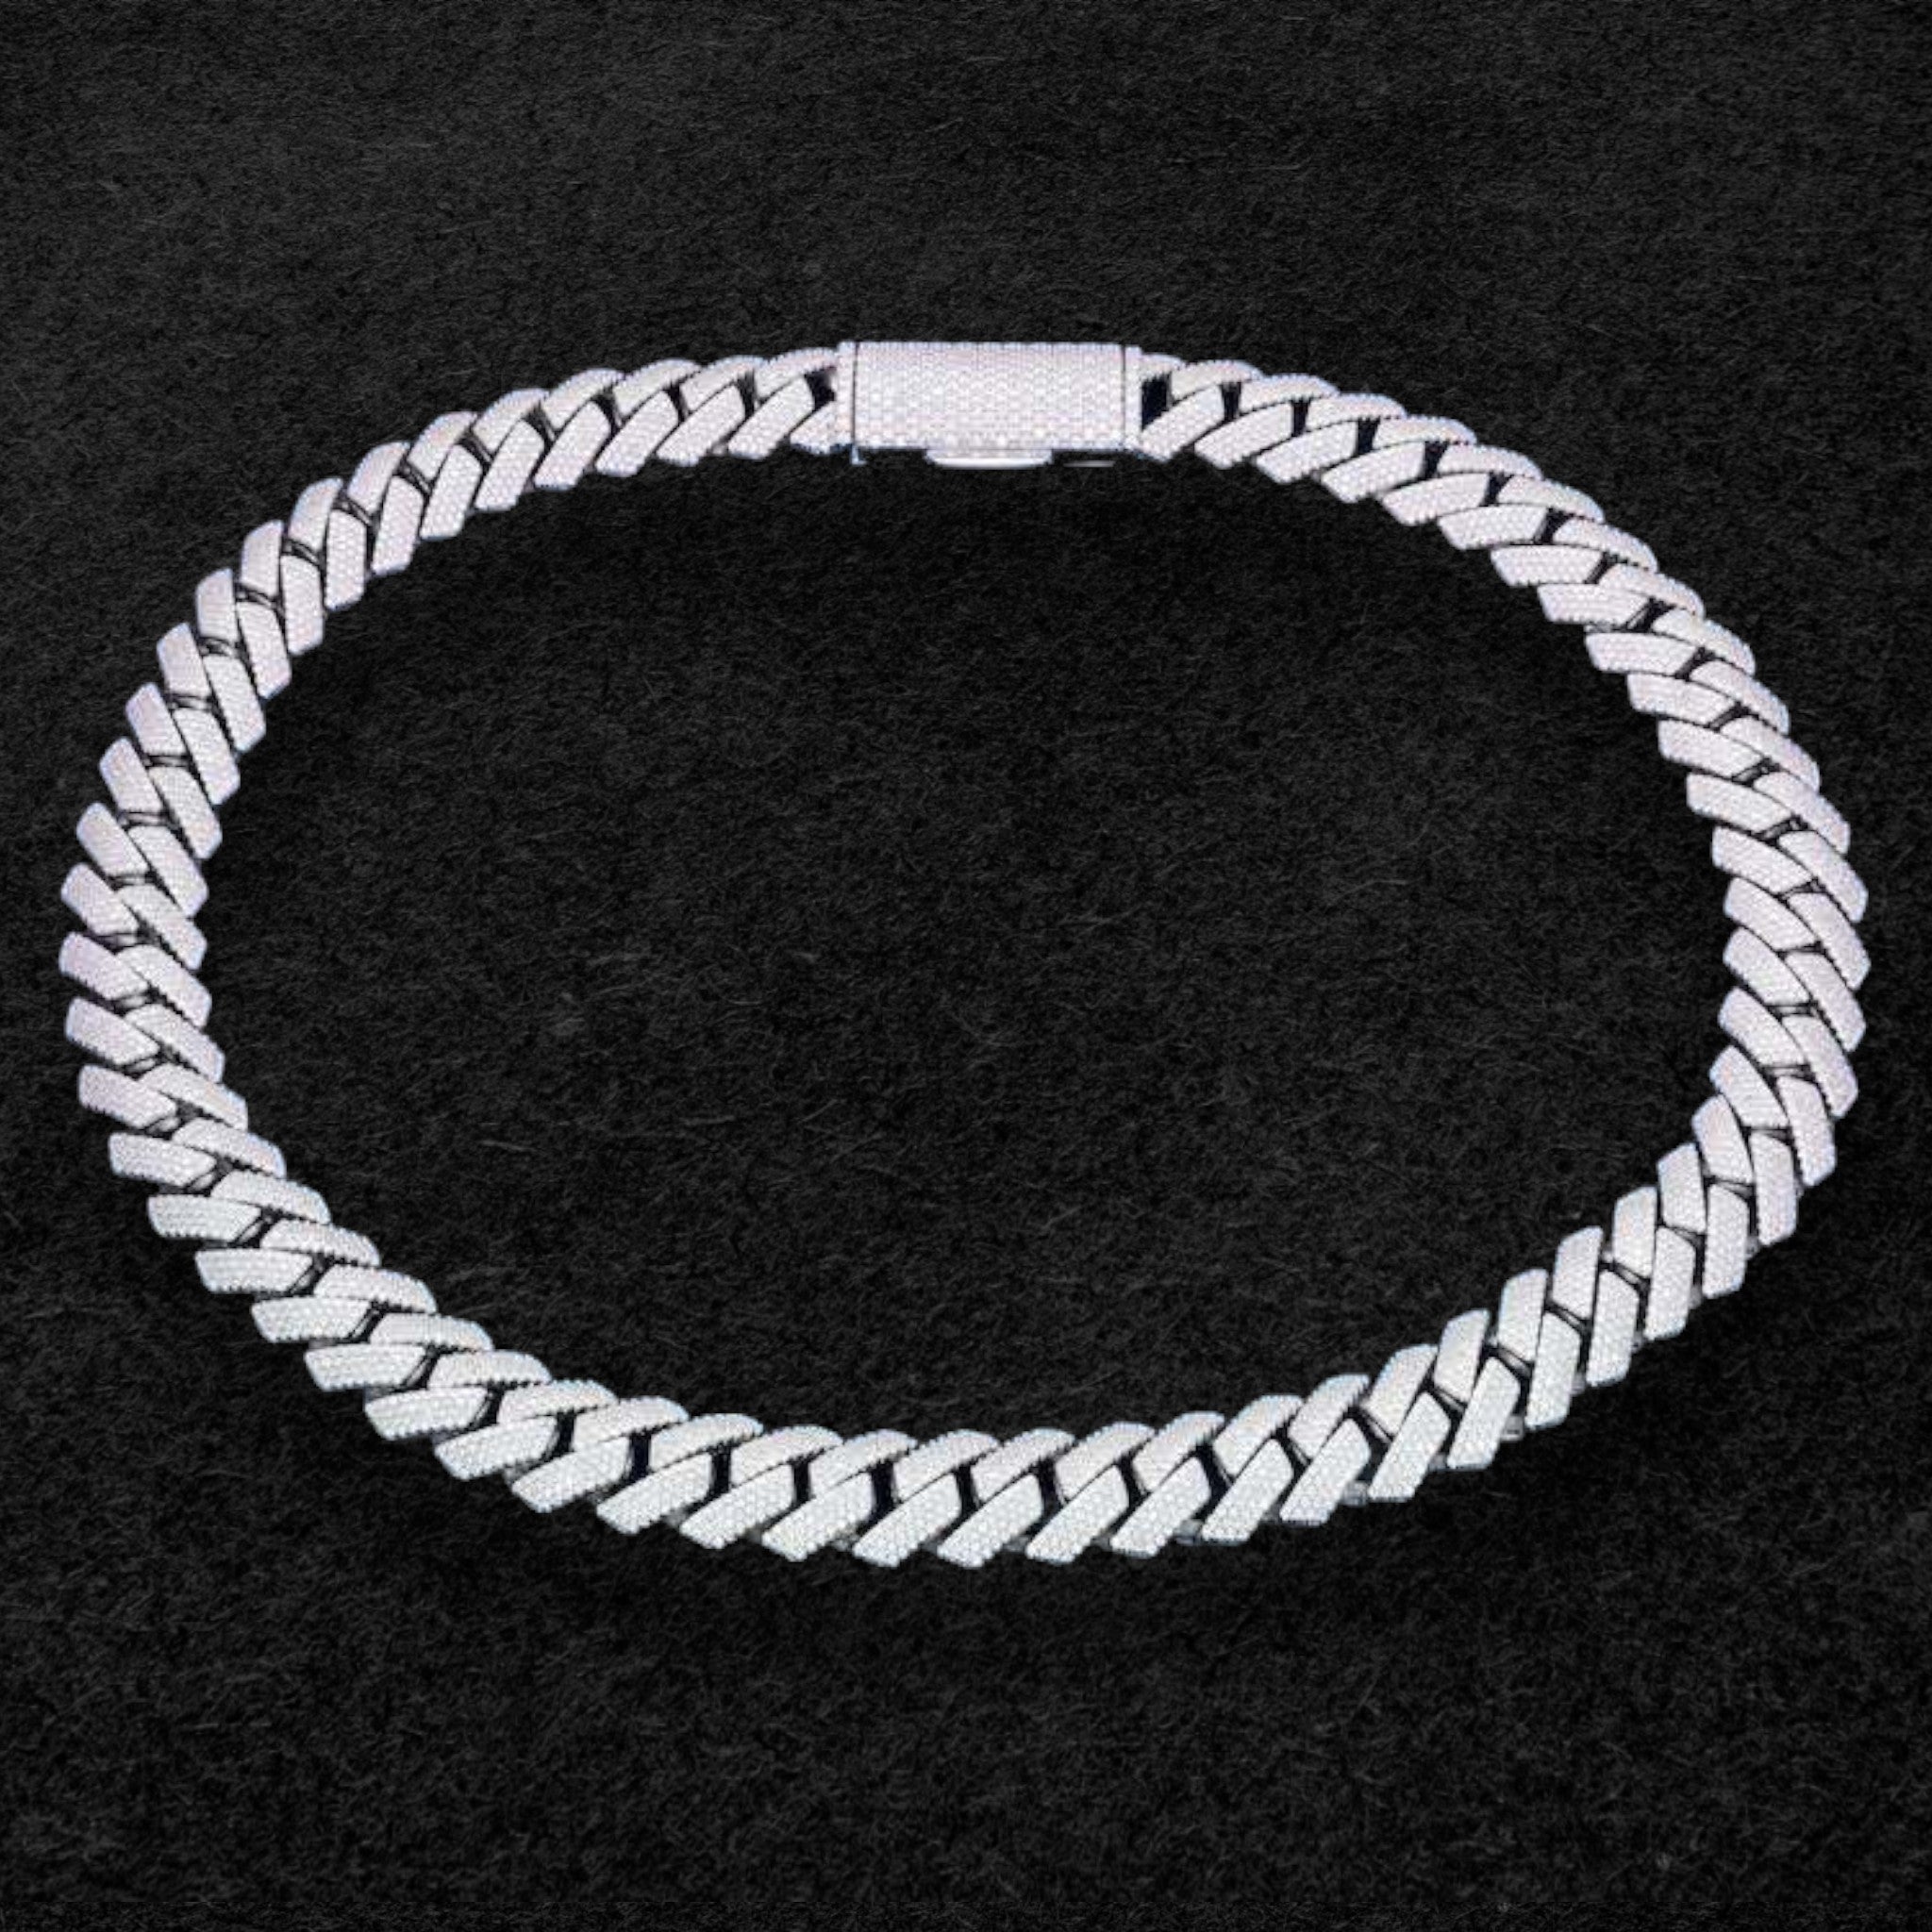 Exquisite 4-Row 15mm Moissanite Cuban Link Chain